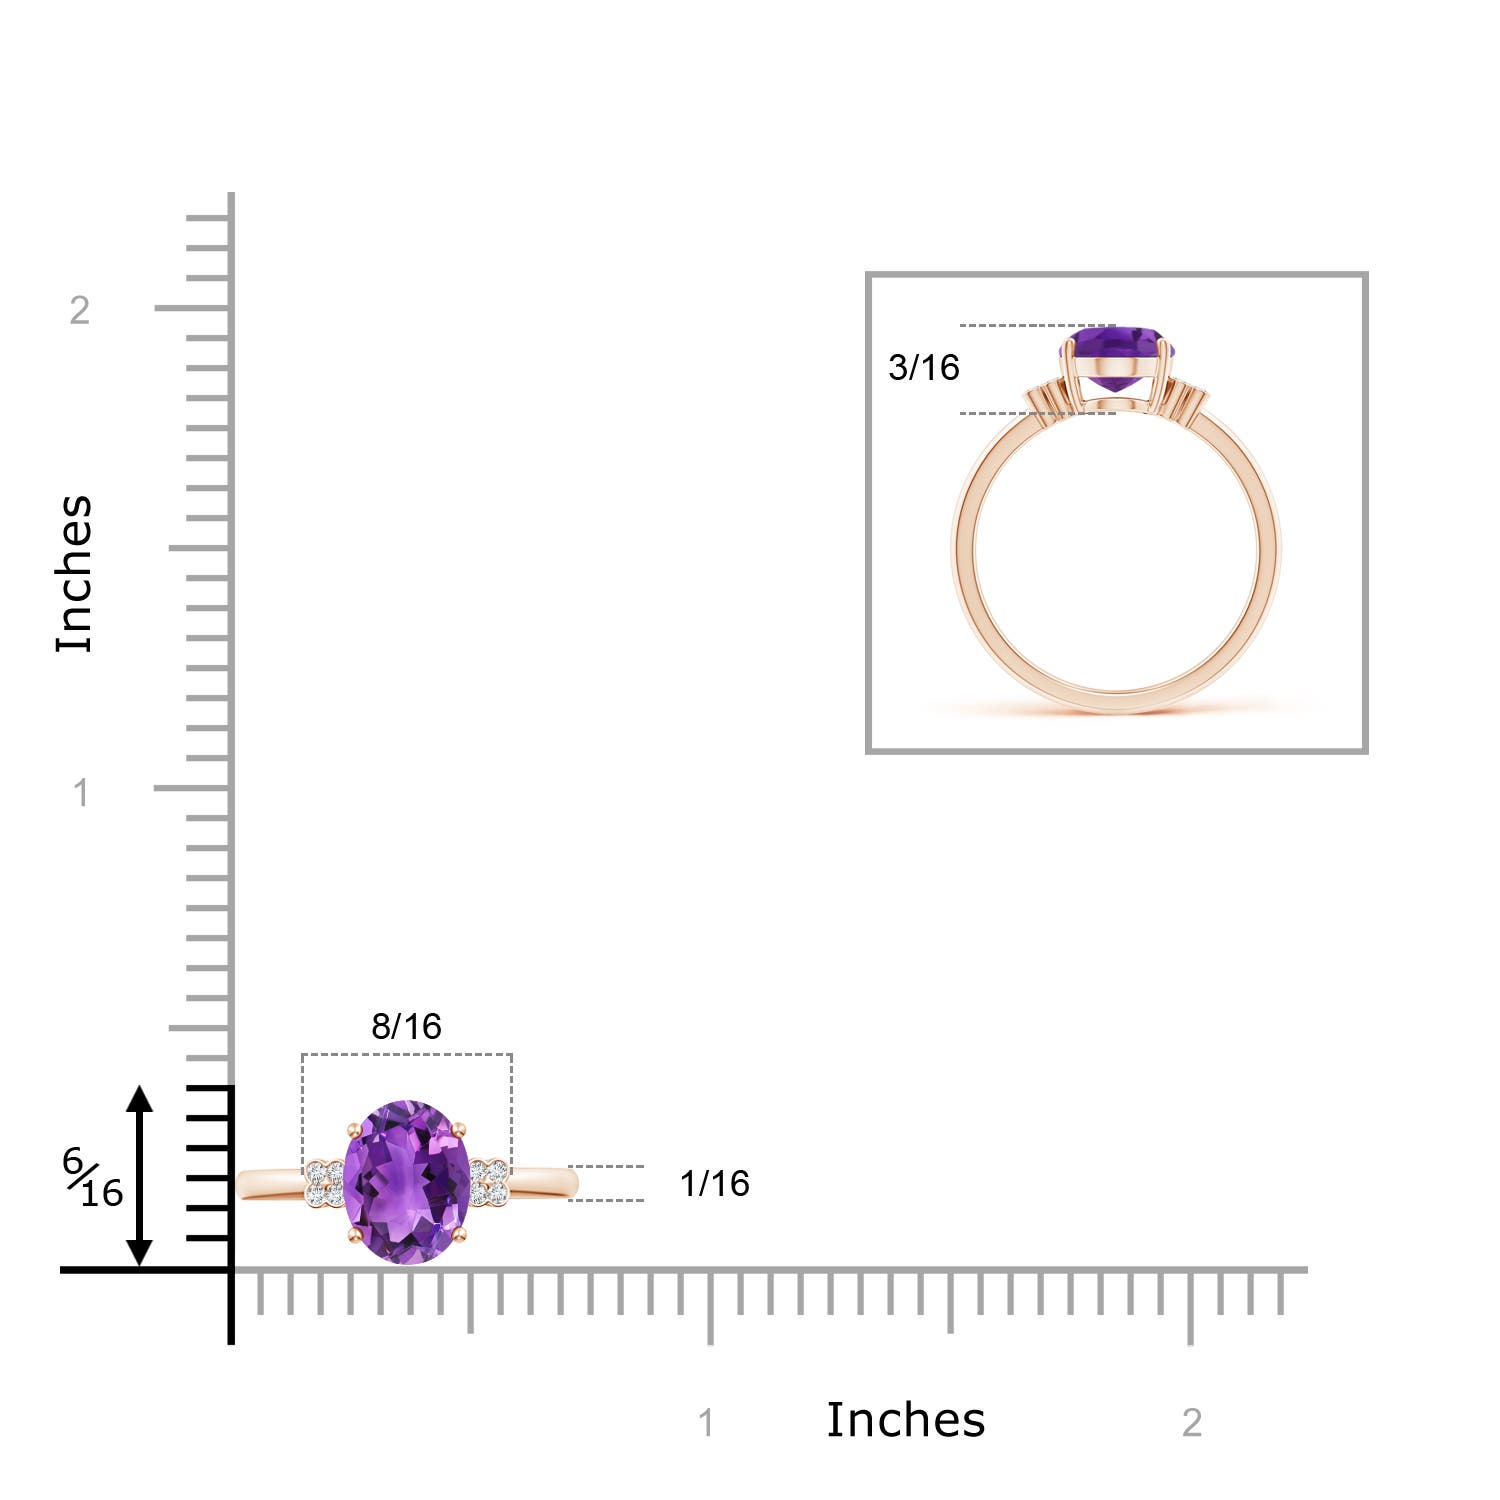 AAA- Amethyst / 1.66 CT / 14 KT Rose Gold